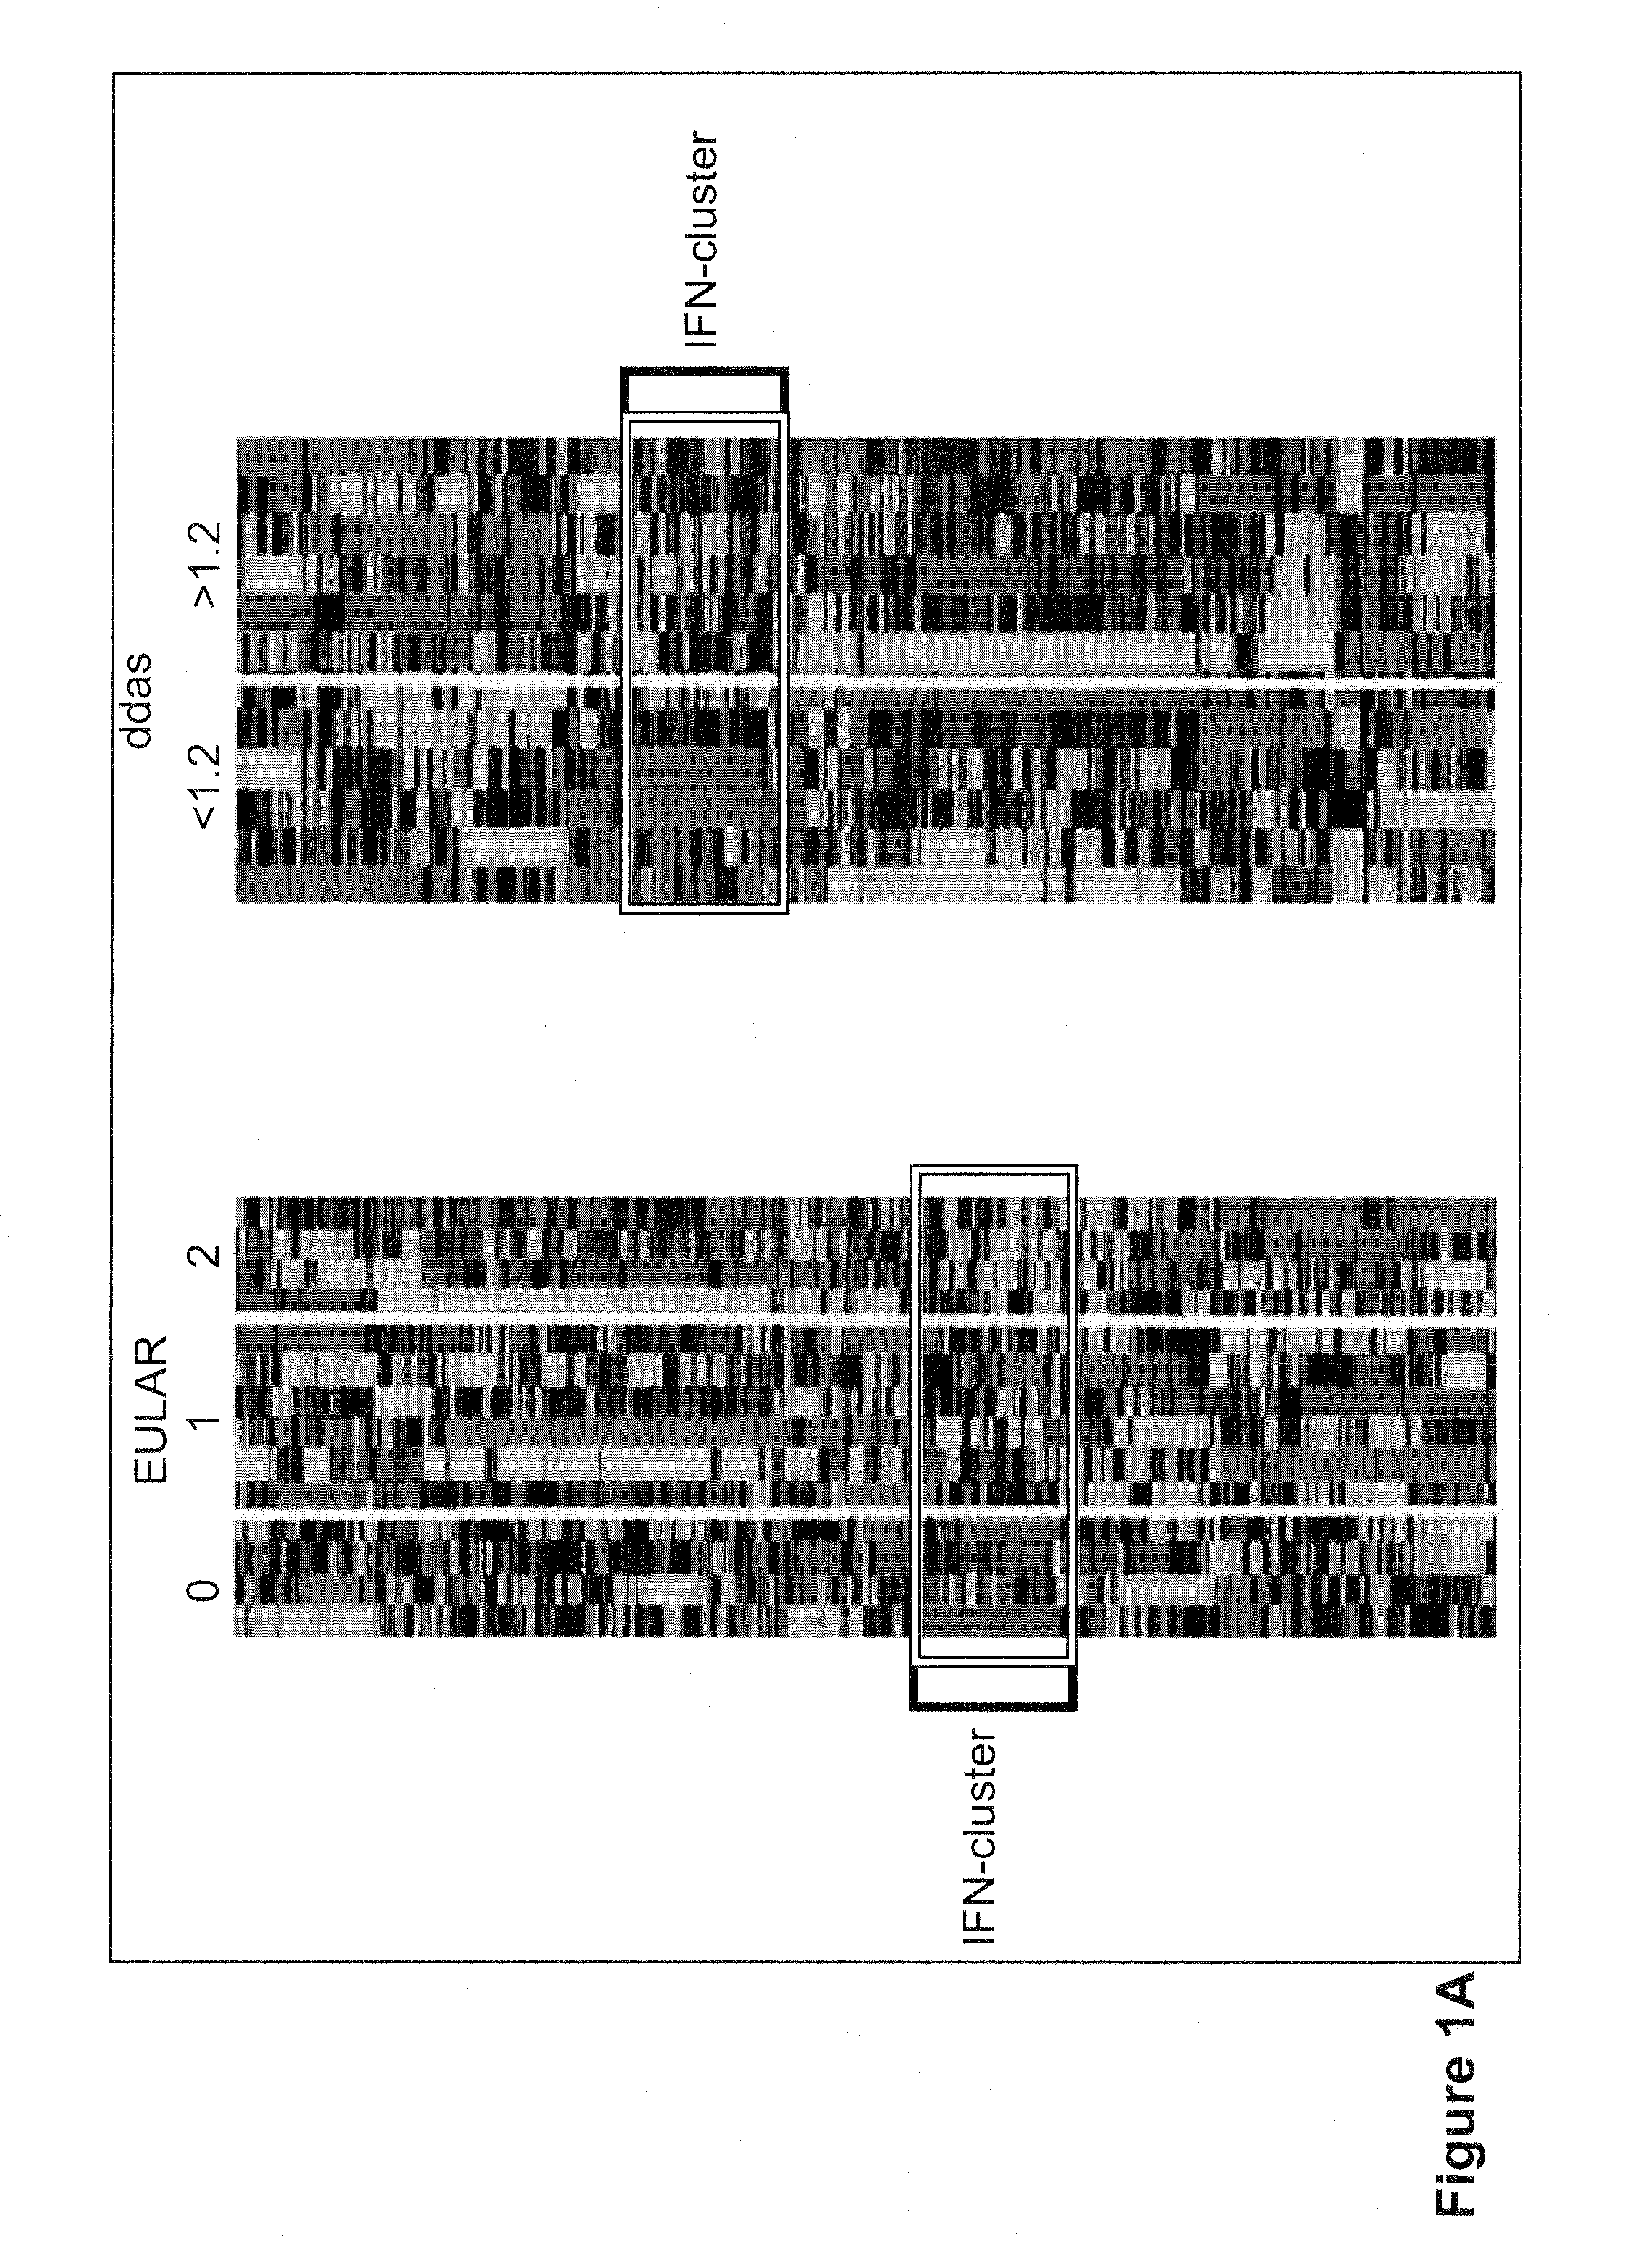 Method for prognosticating the clinical response of a patient to b-lymphocyte inhibiting or depleting therapy